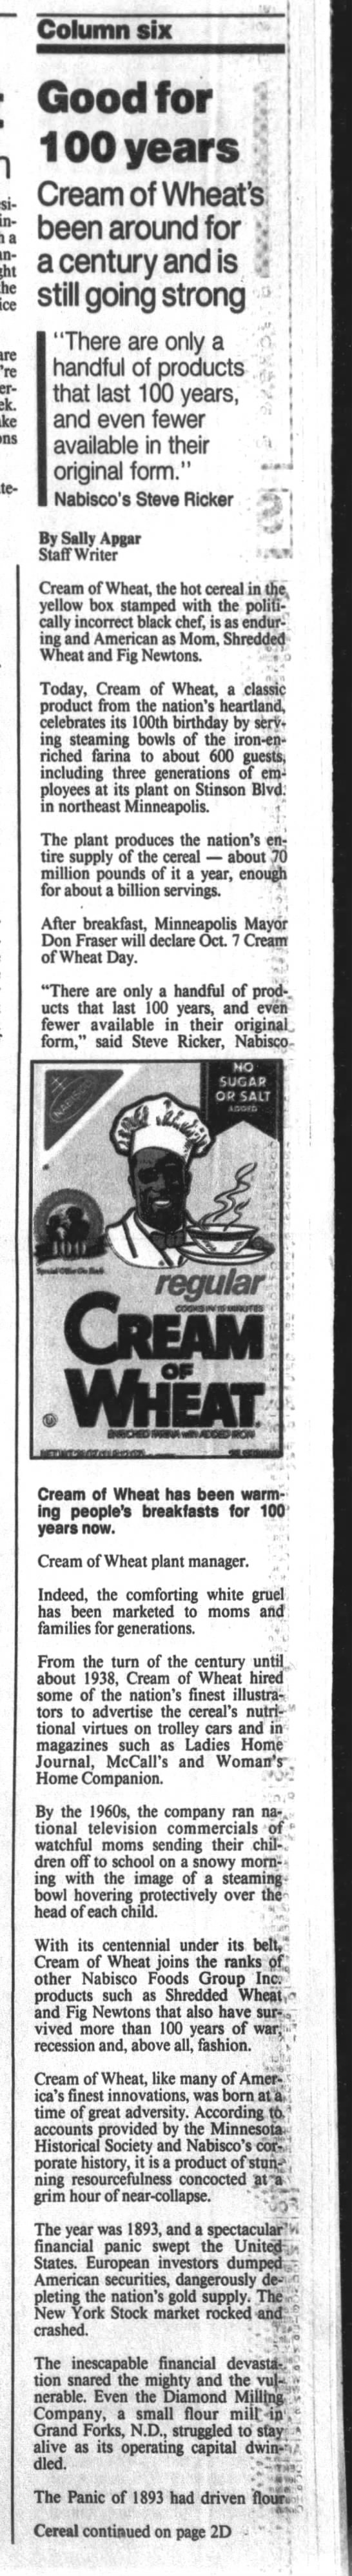 Cream of Wheat's Centennial: "Good For 100 Years" (pt 1) - 